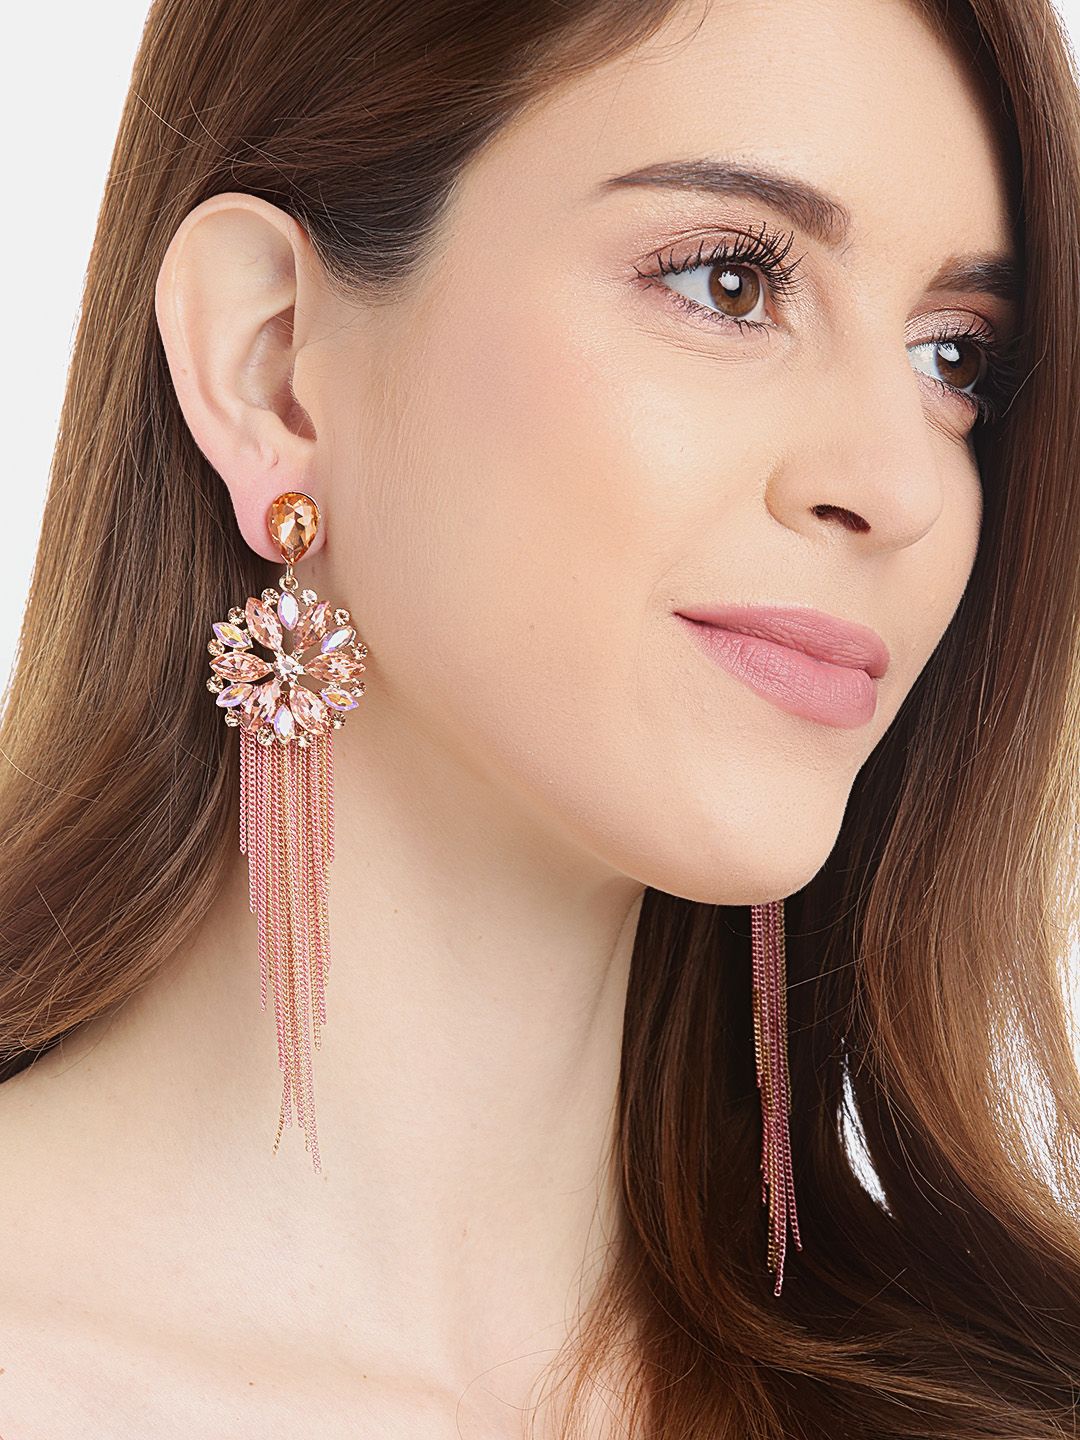 YouBella Peach-Coloured & Gold-Toned Stone-Studded Tasselled Floral Drop Earrings Price in India